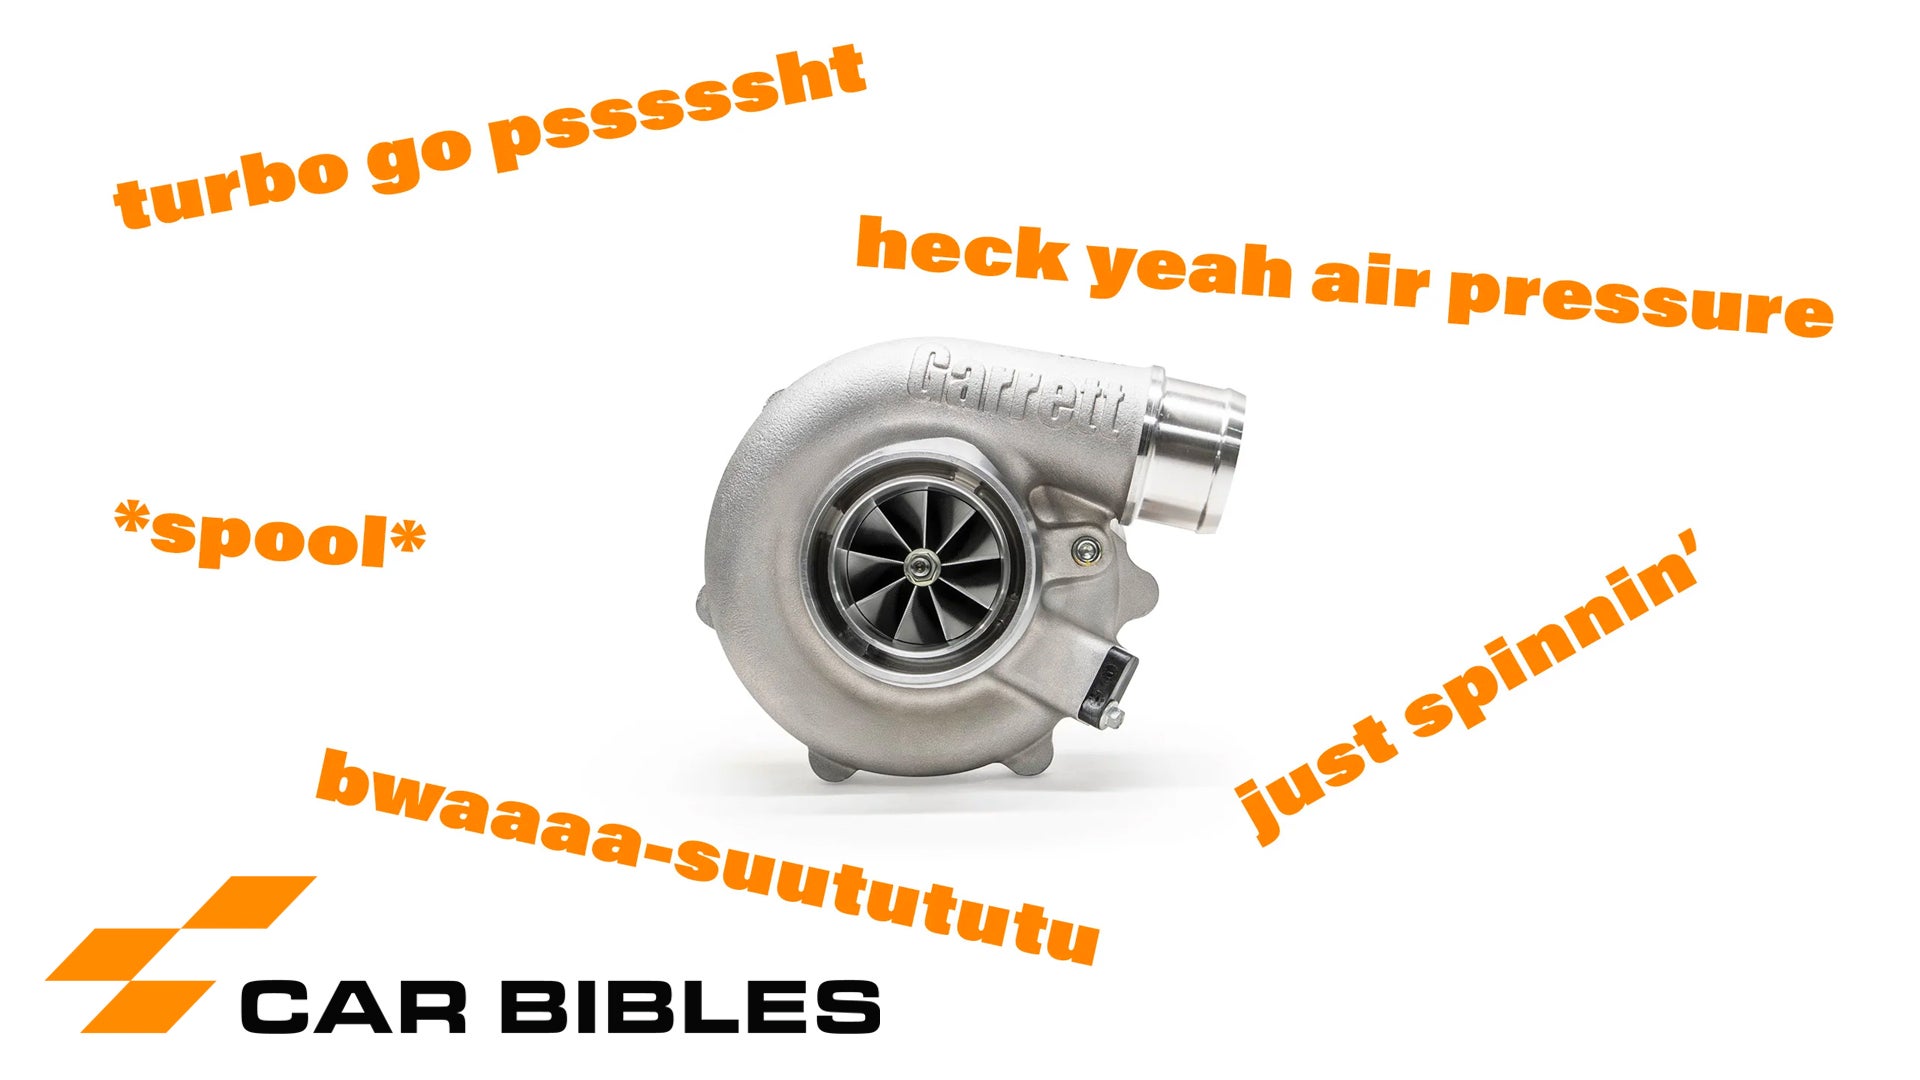 How to Talk About Turbochargers Without Sounding Dumb